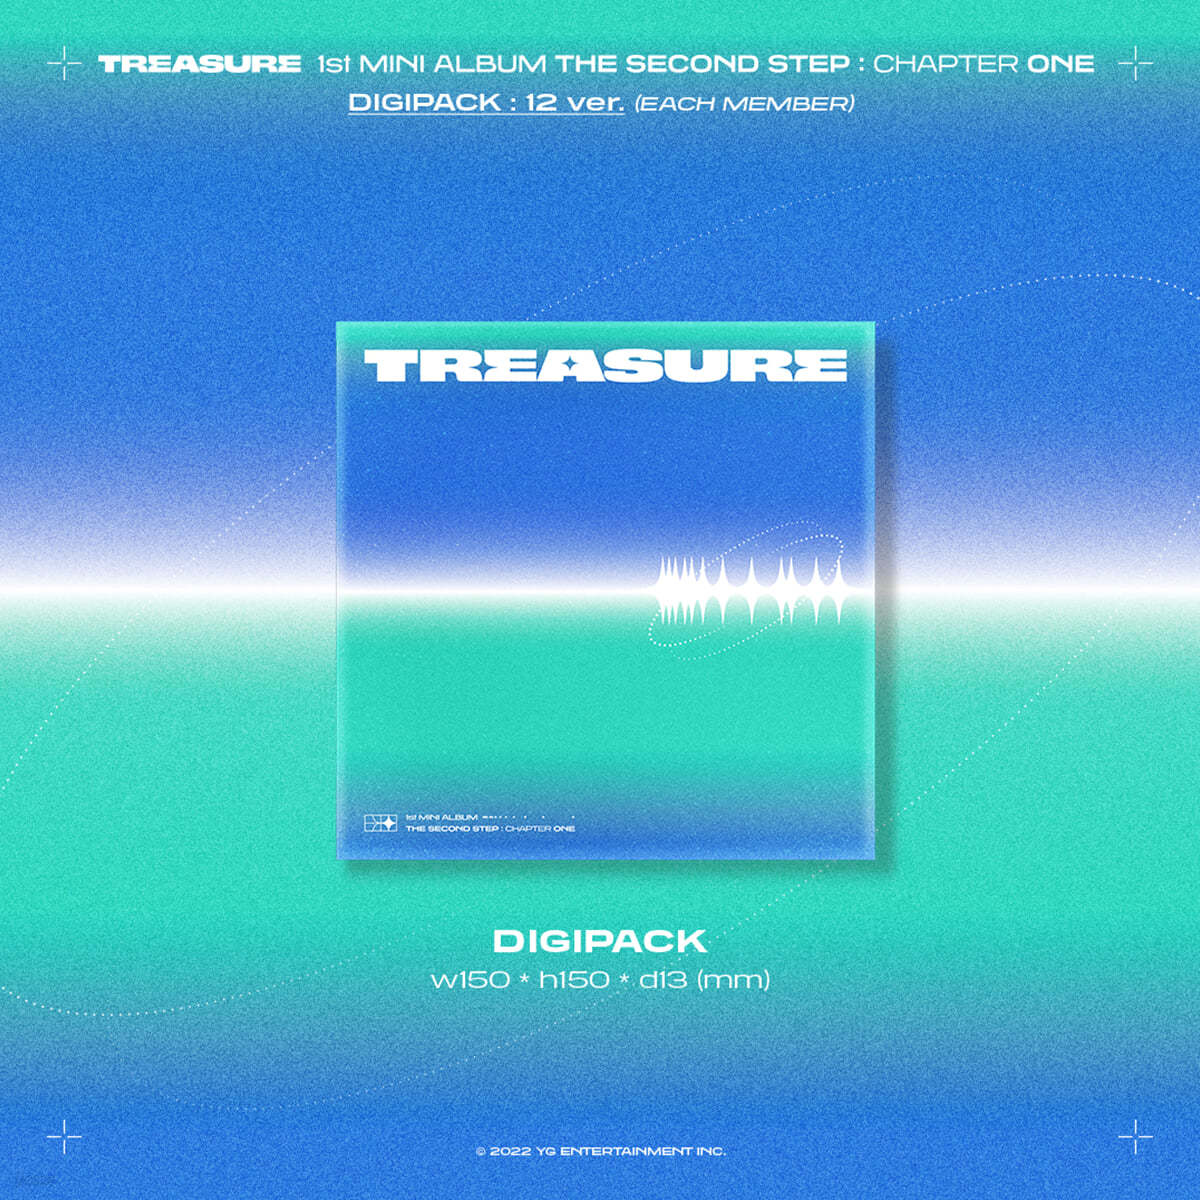 TREASURE (트레저) - TREASURE 1st MINI ALBUM [THE SECOND STEP : CHAPTER ONE] [DIGIPACK ver.] [DOYOUNG]